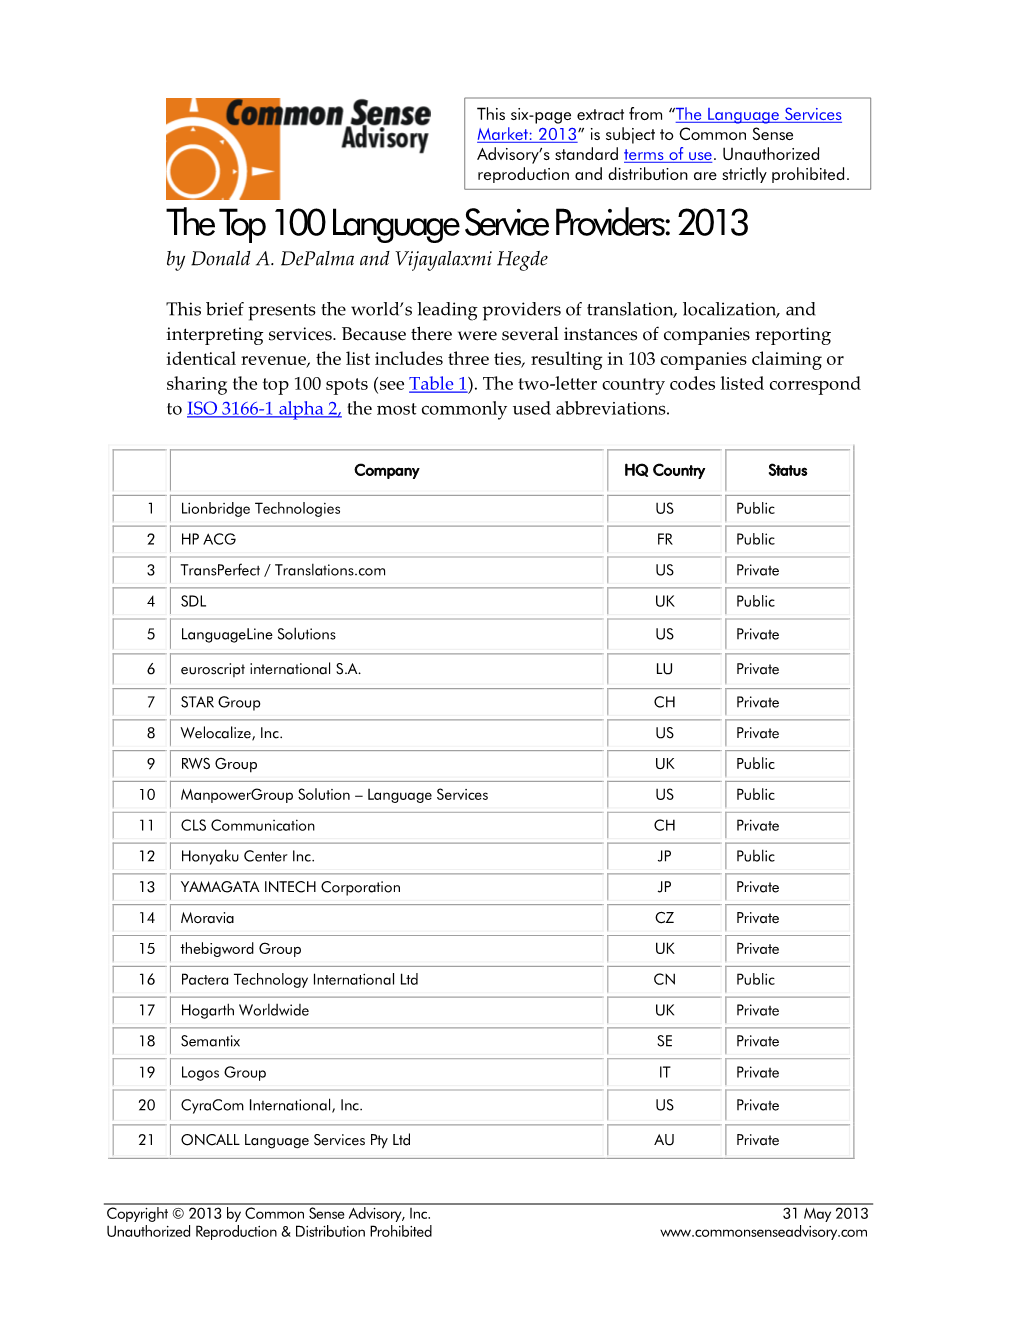 The Top 100 Language Service Providers: 2013 by Donald A